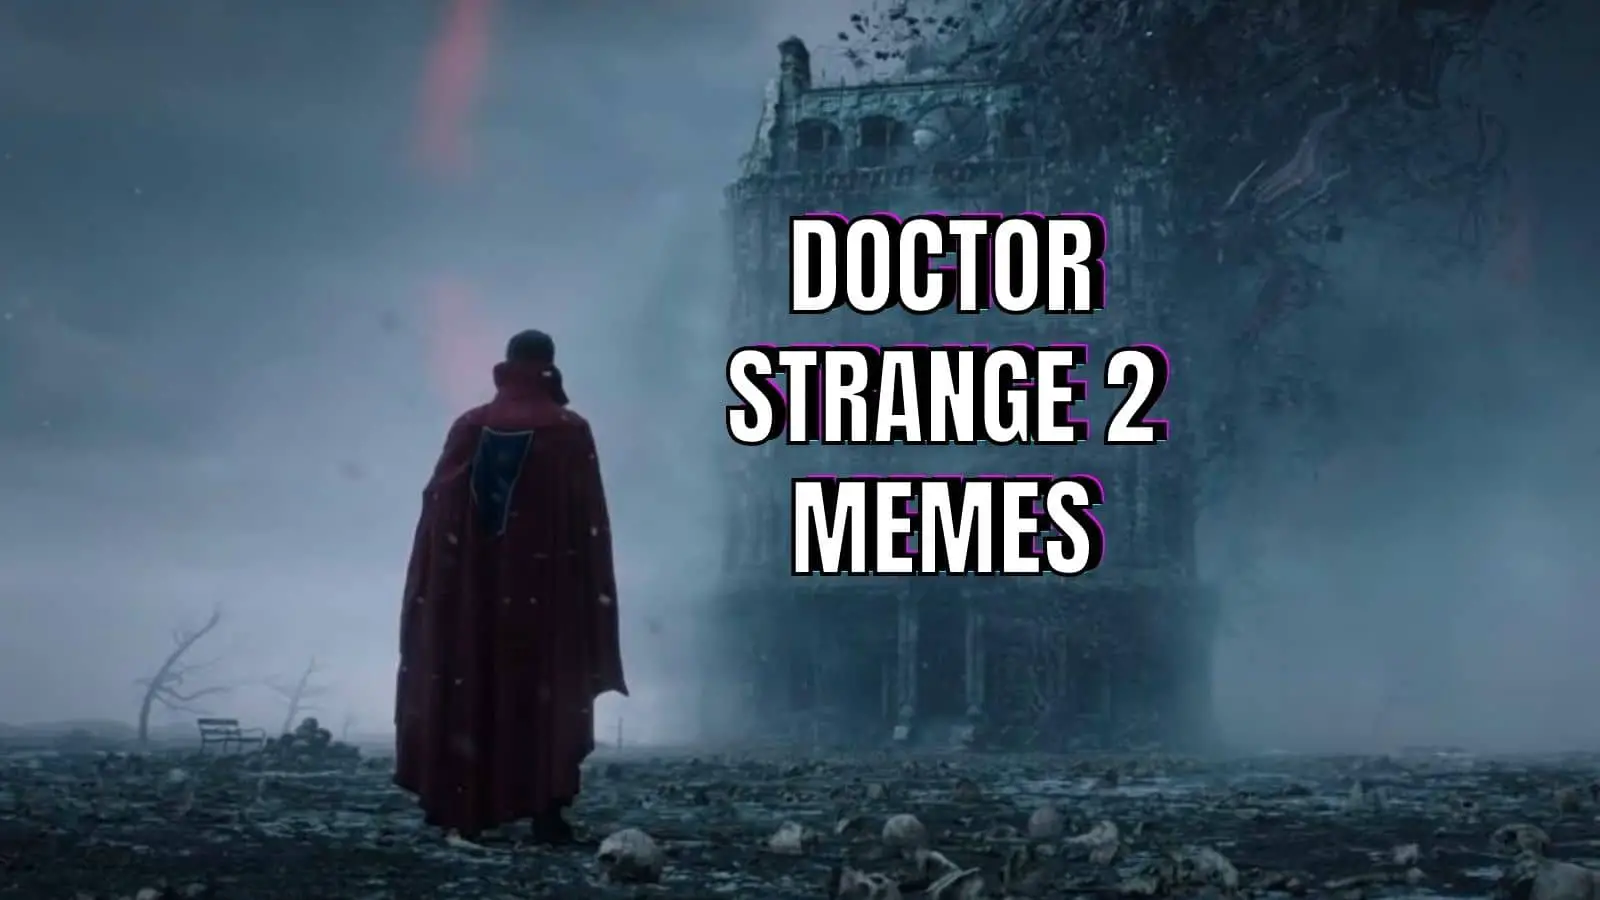 Funny Doctor Strange 2 Memes in the multiverse of madness